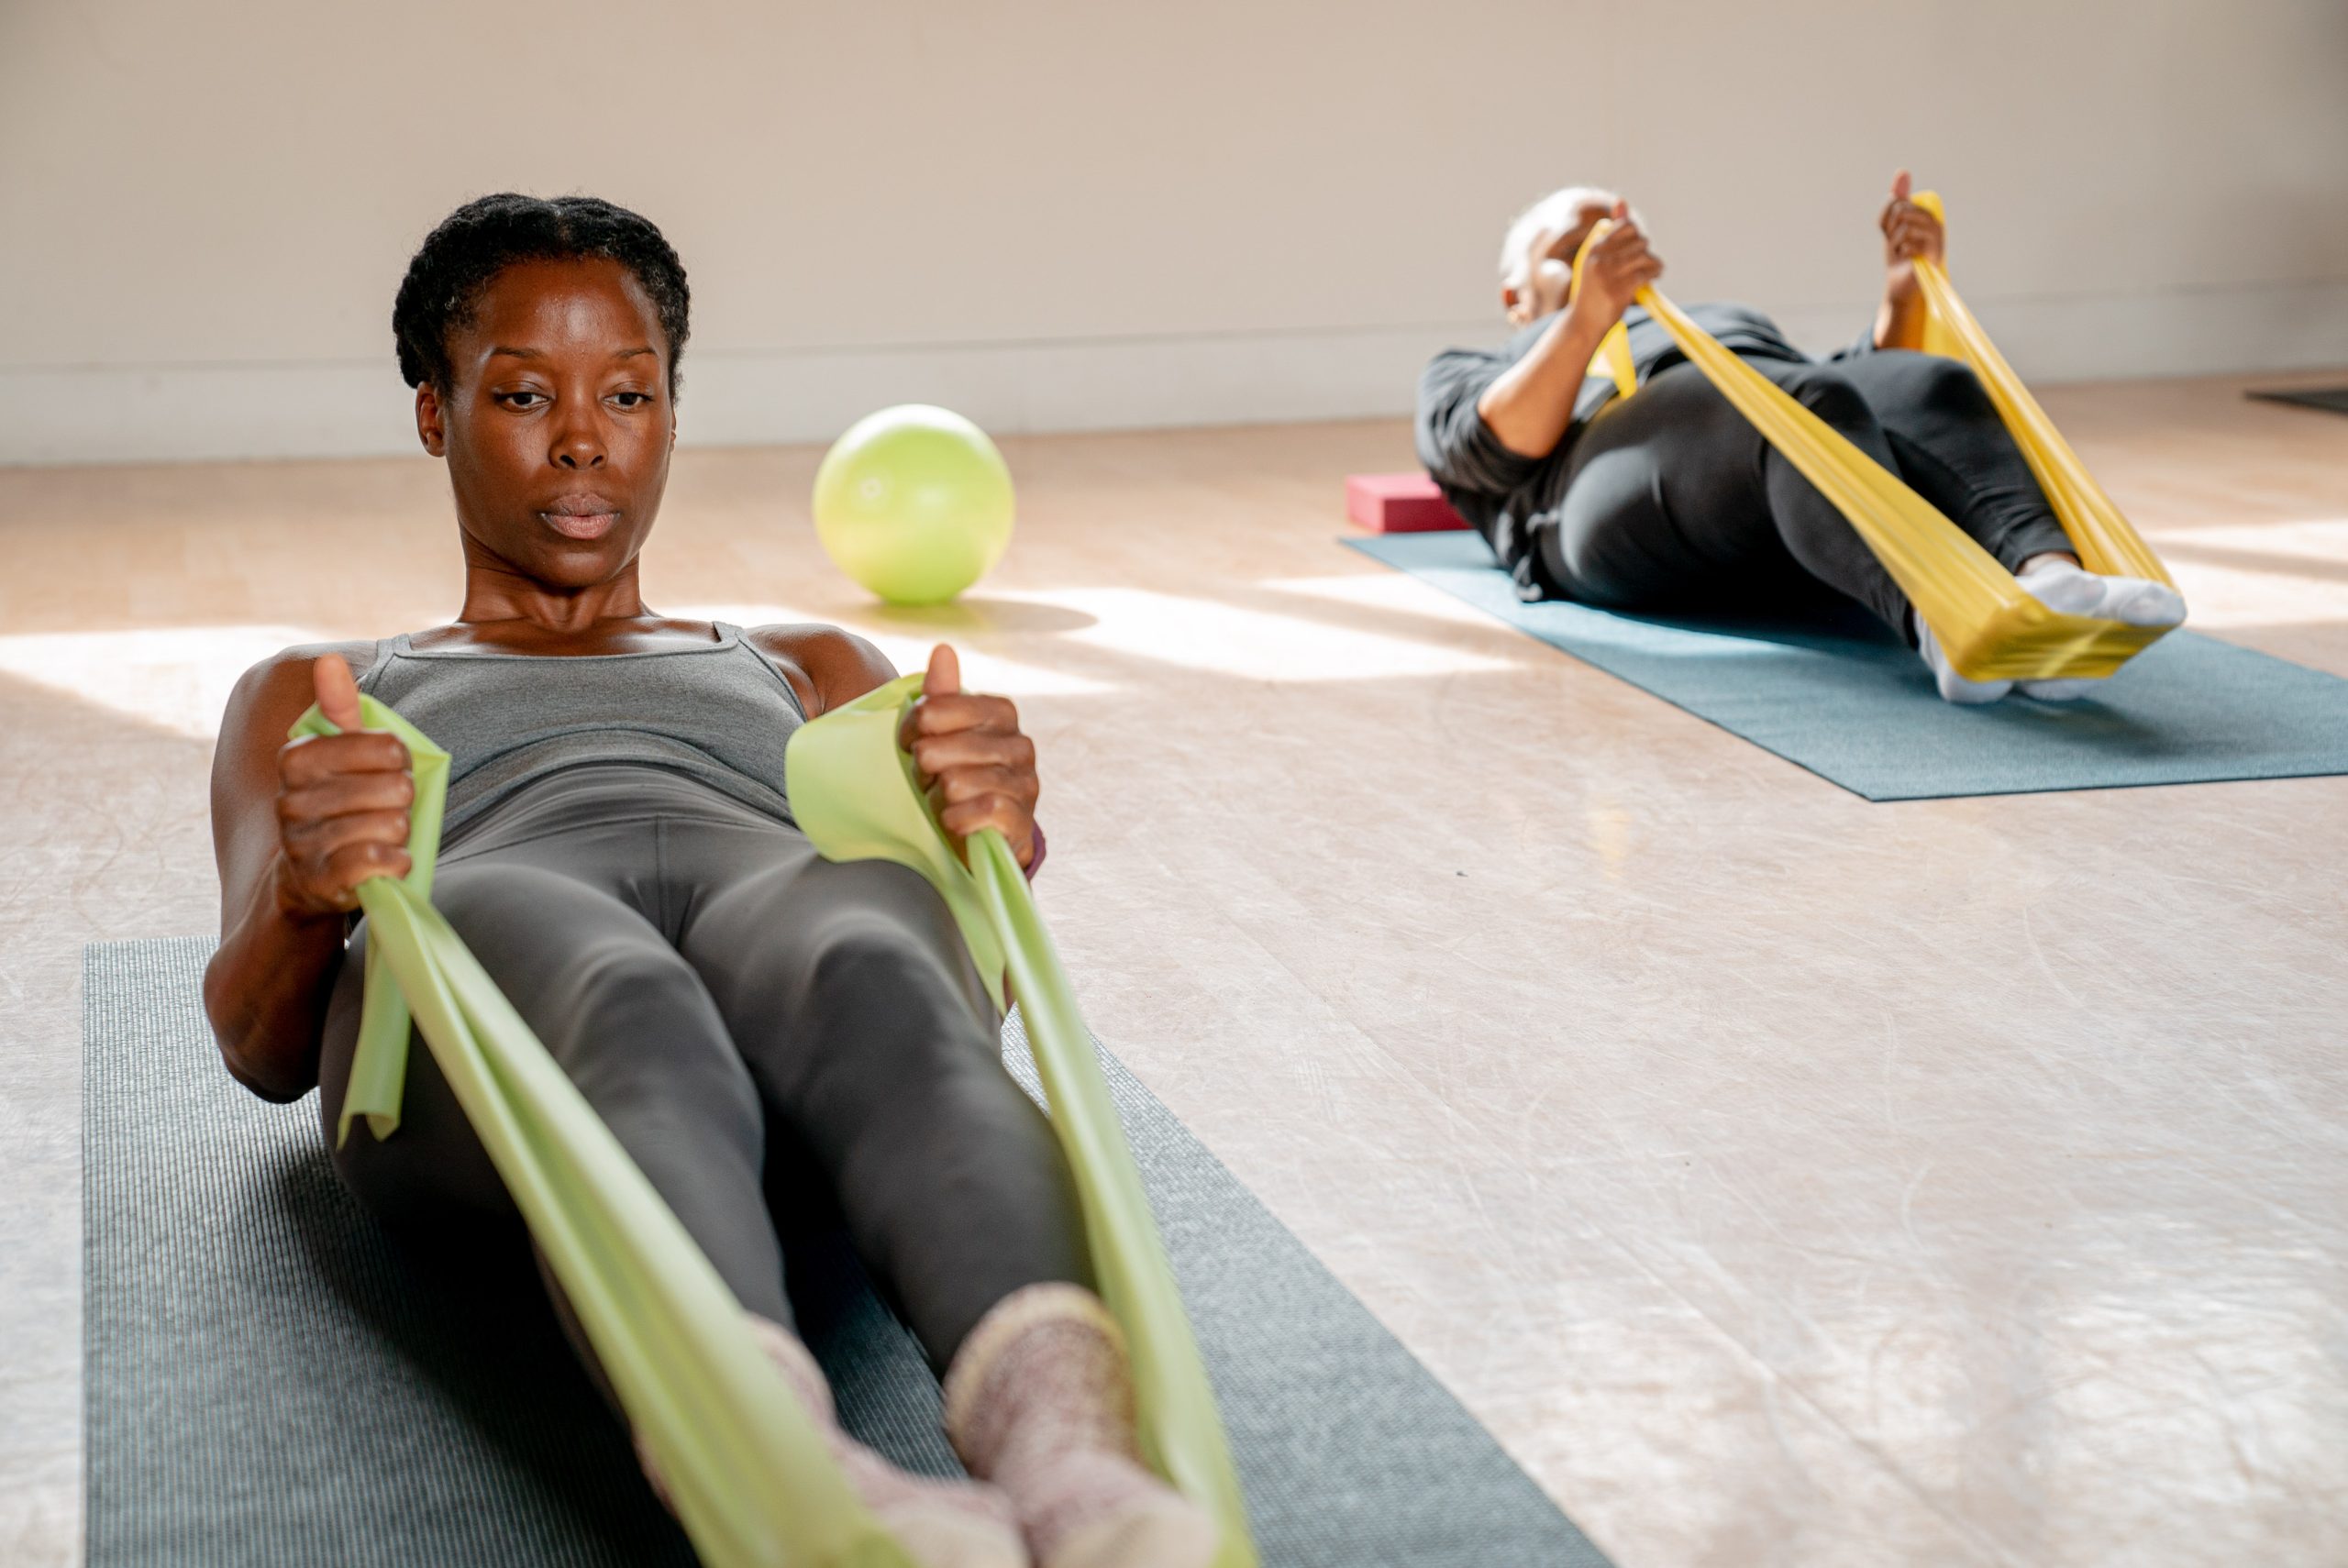 STOTT PILATES: Athletic Conditioning on the Cardio-Tramp Rebounder